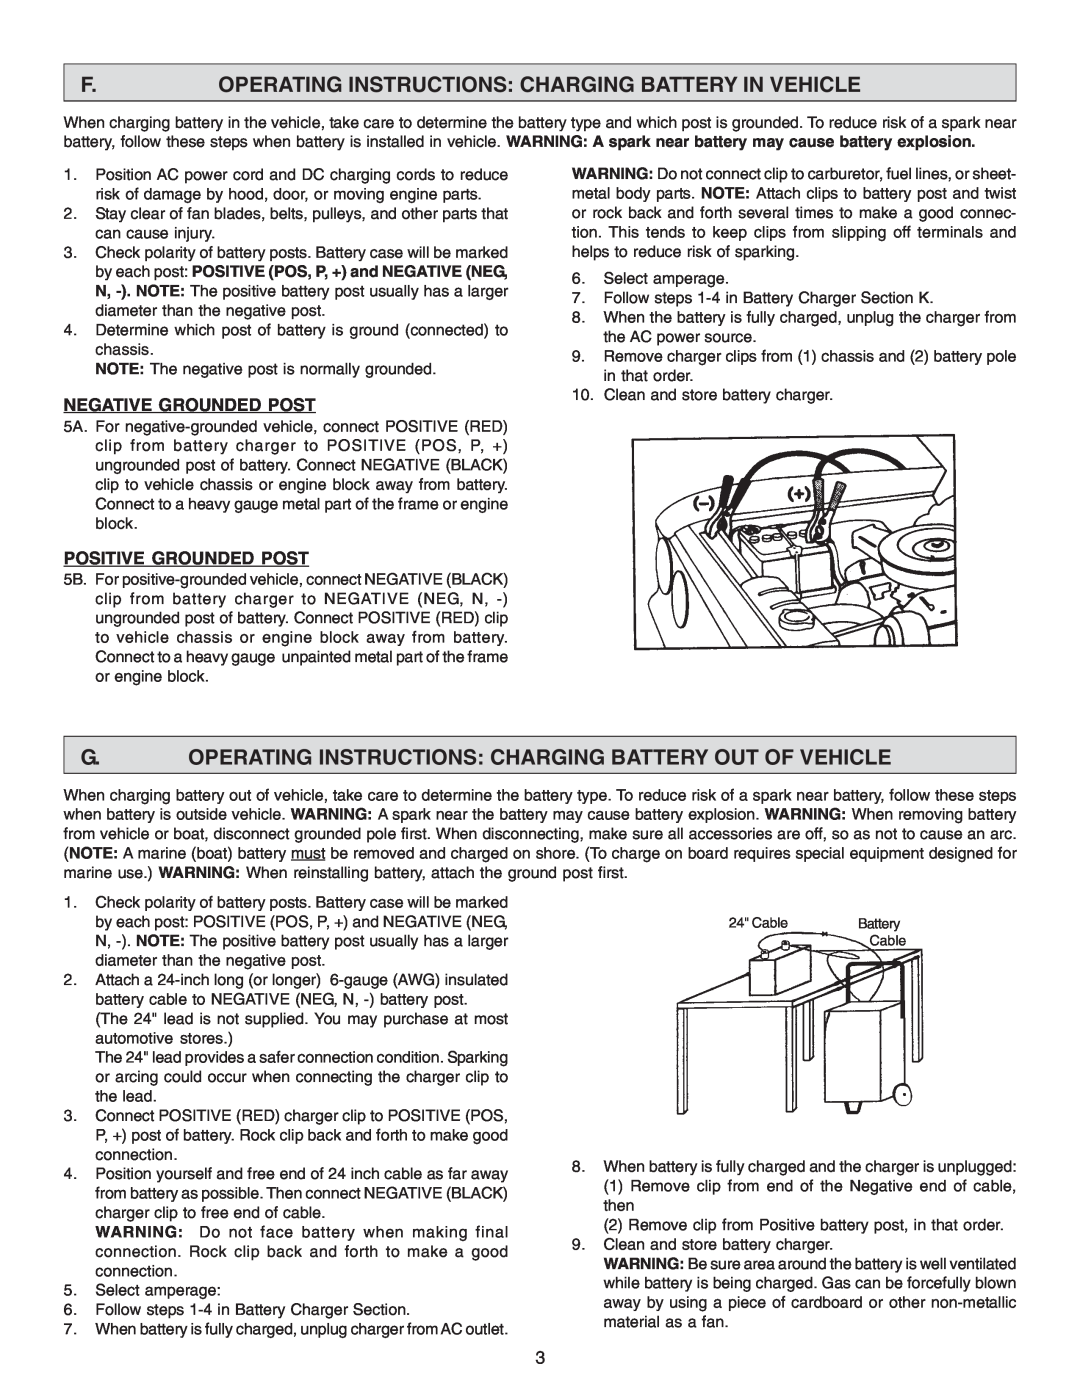 Schumacher SE-4220 F.Operating Instructions Charging Battery In Vehicle, Negative Grounded Post, Positive Grounded Post 